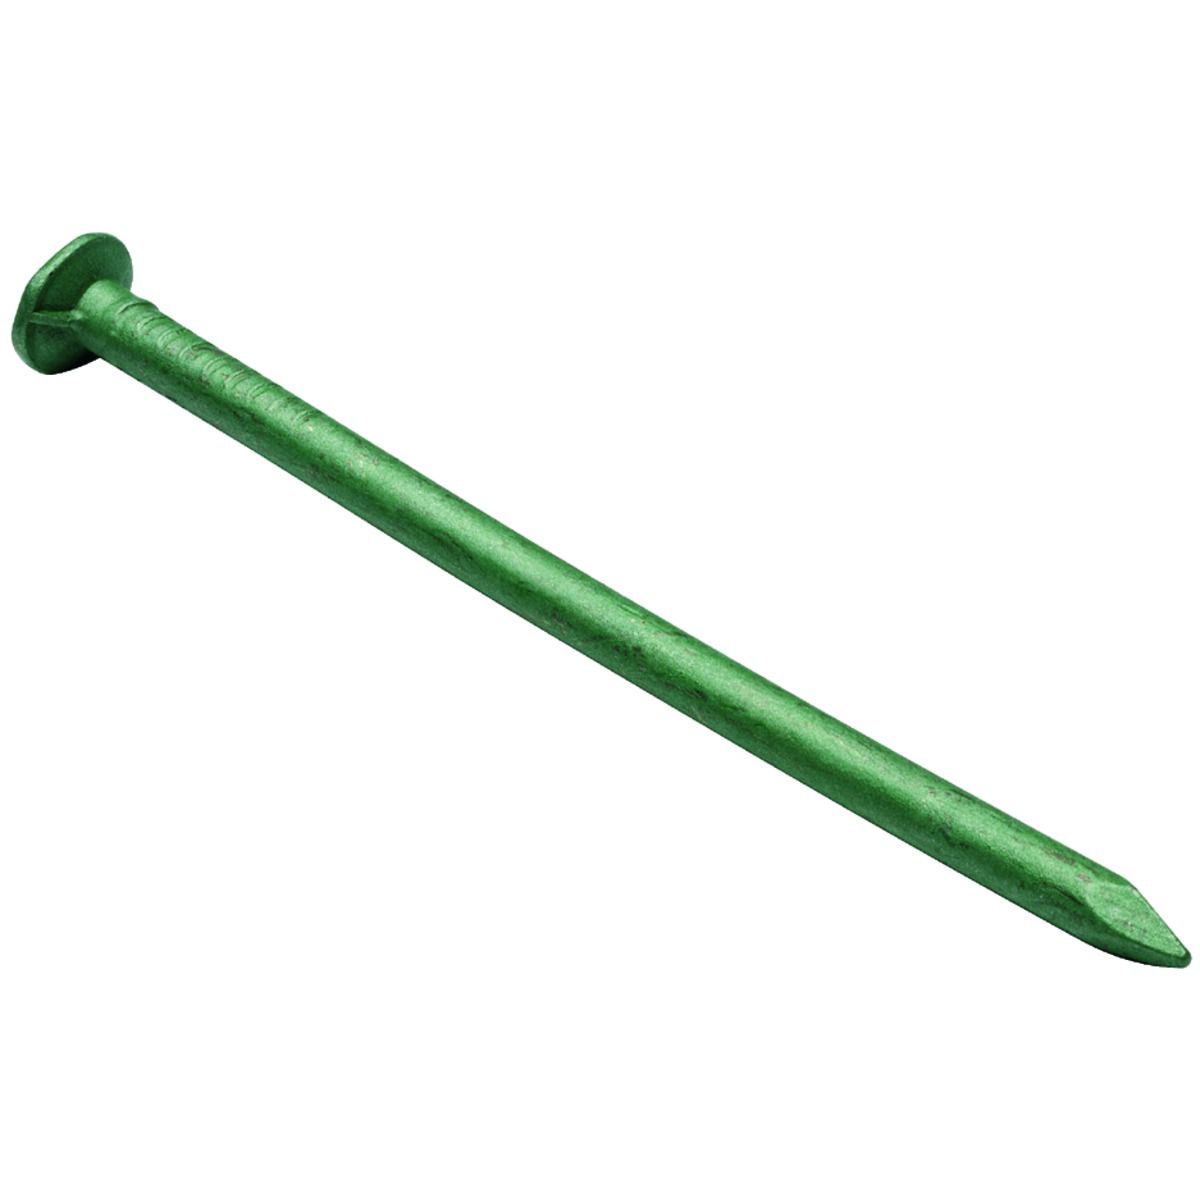 Image of Wickes 50mm Exterior Nails - 250g